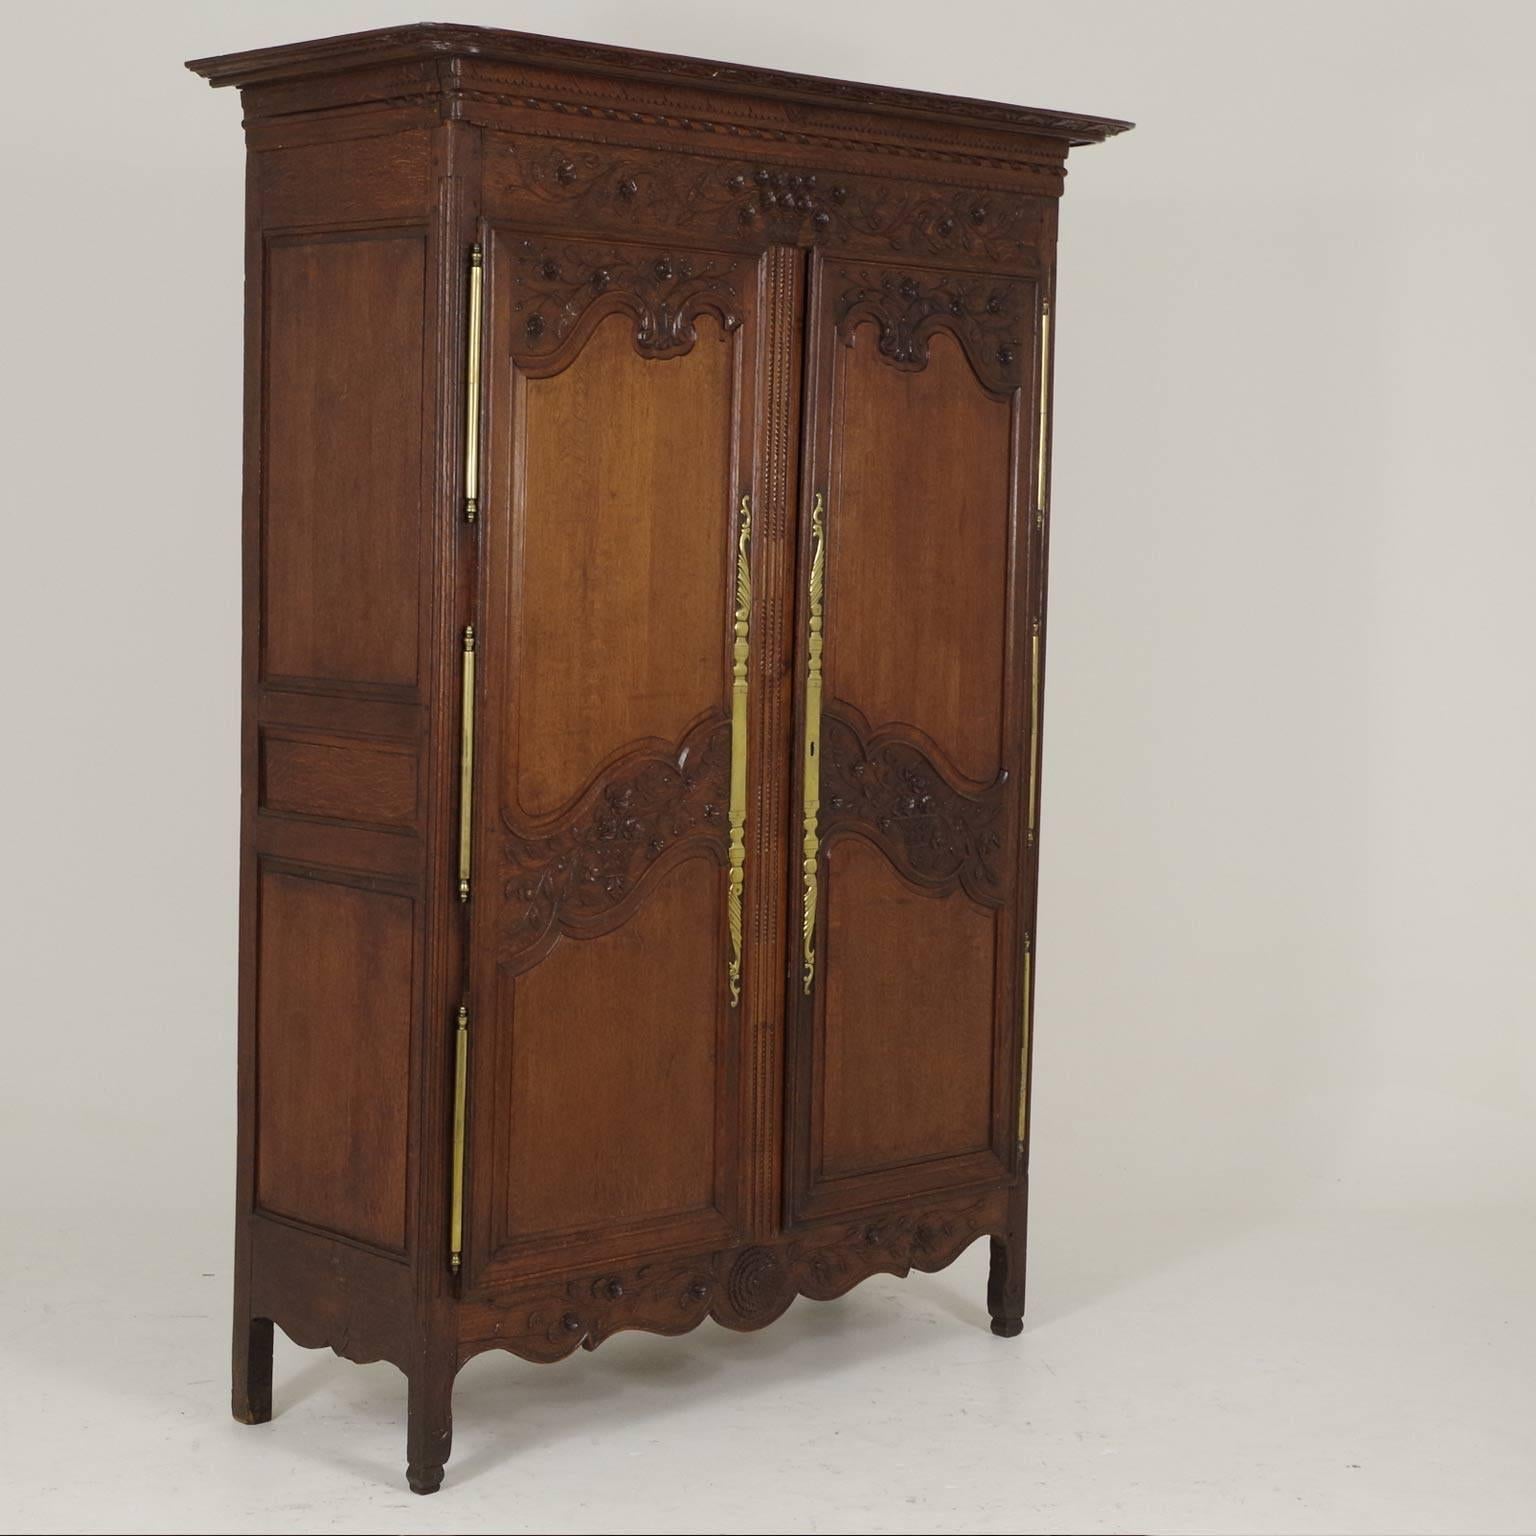 French Provincial Antique French Normandy Marriage Armoire Wardrobe, 1840